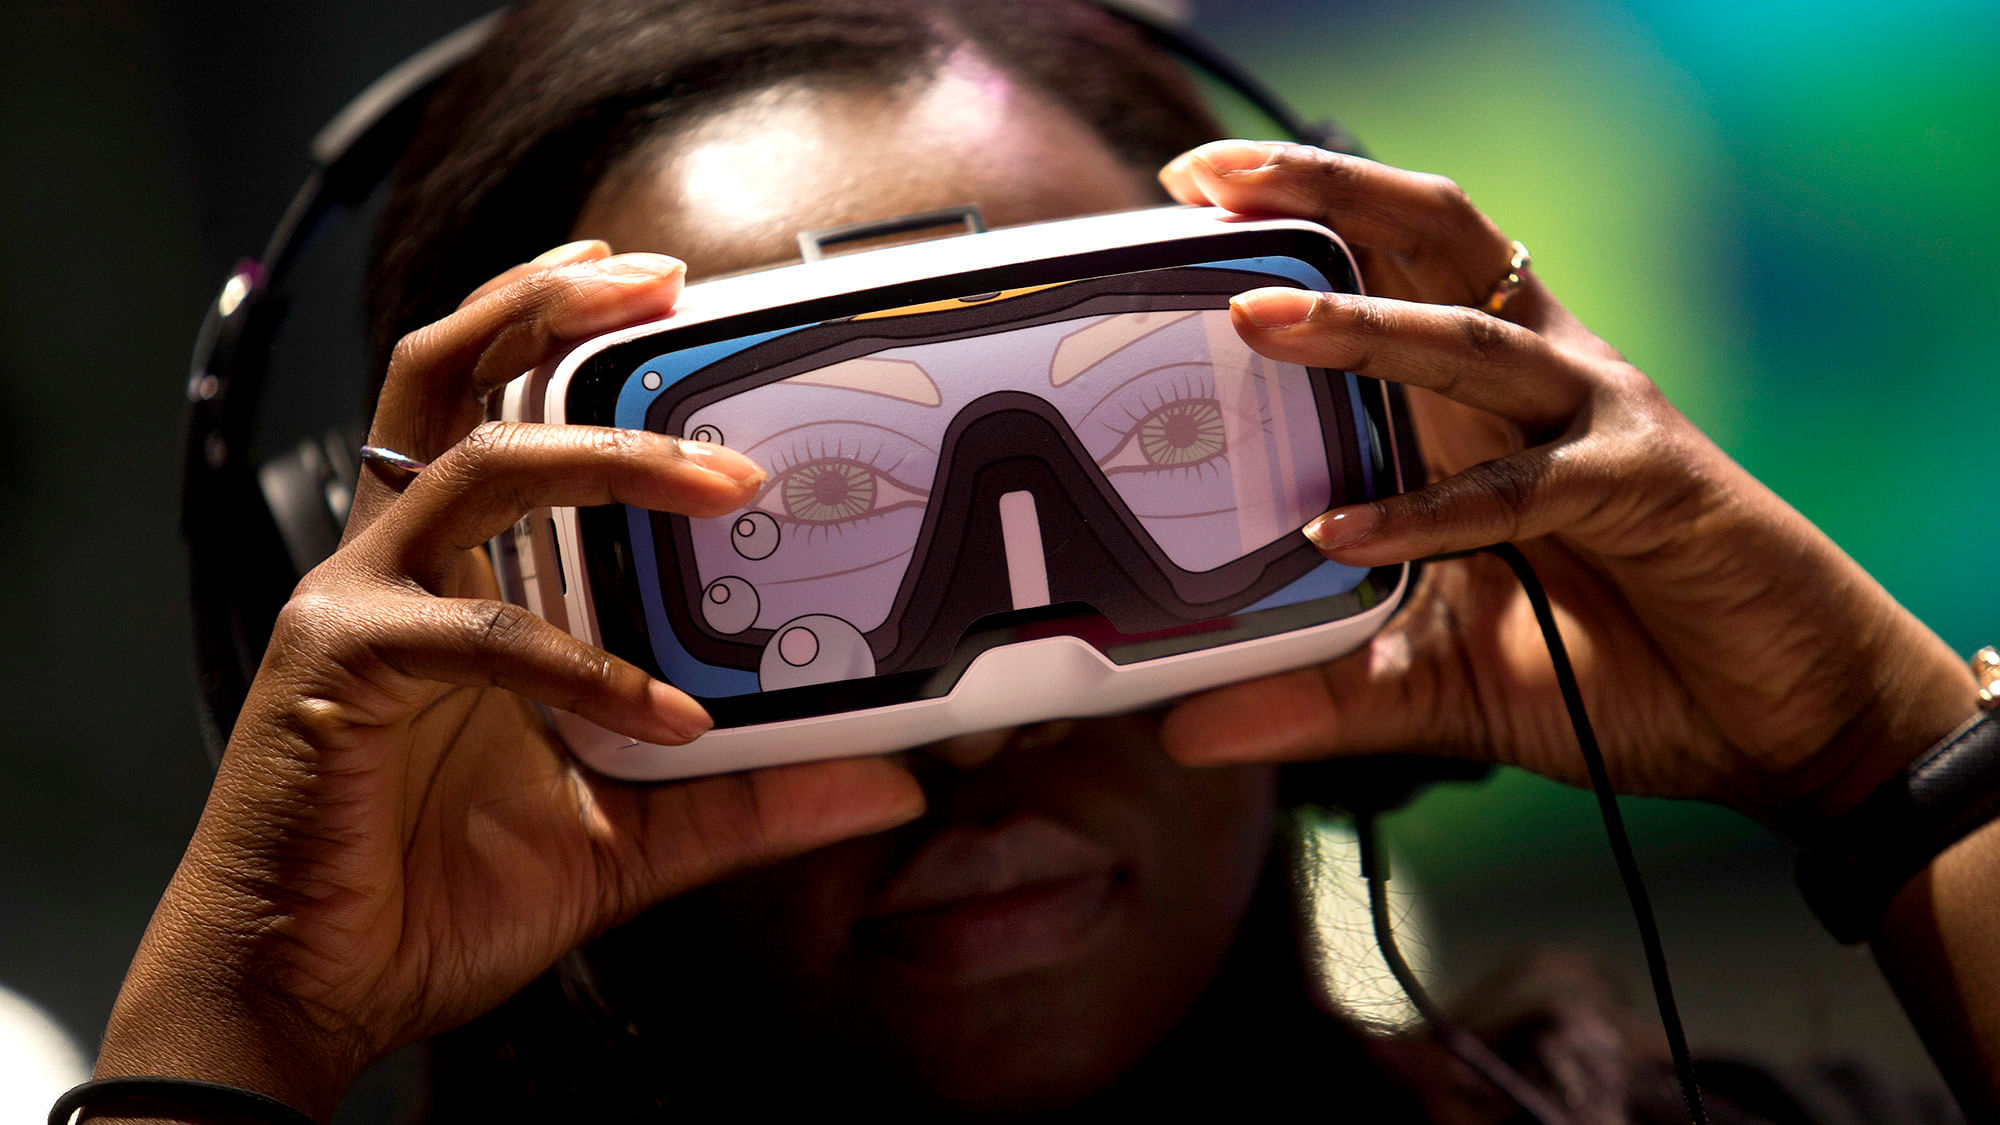 A woman uses a virtual reality device during the Mobile World Congress Wireless show in Barcelona. (Photo: AP) 